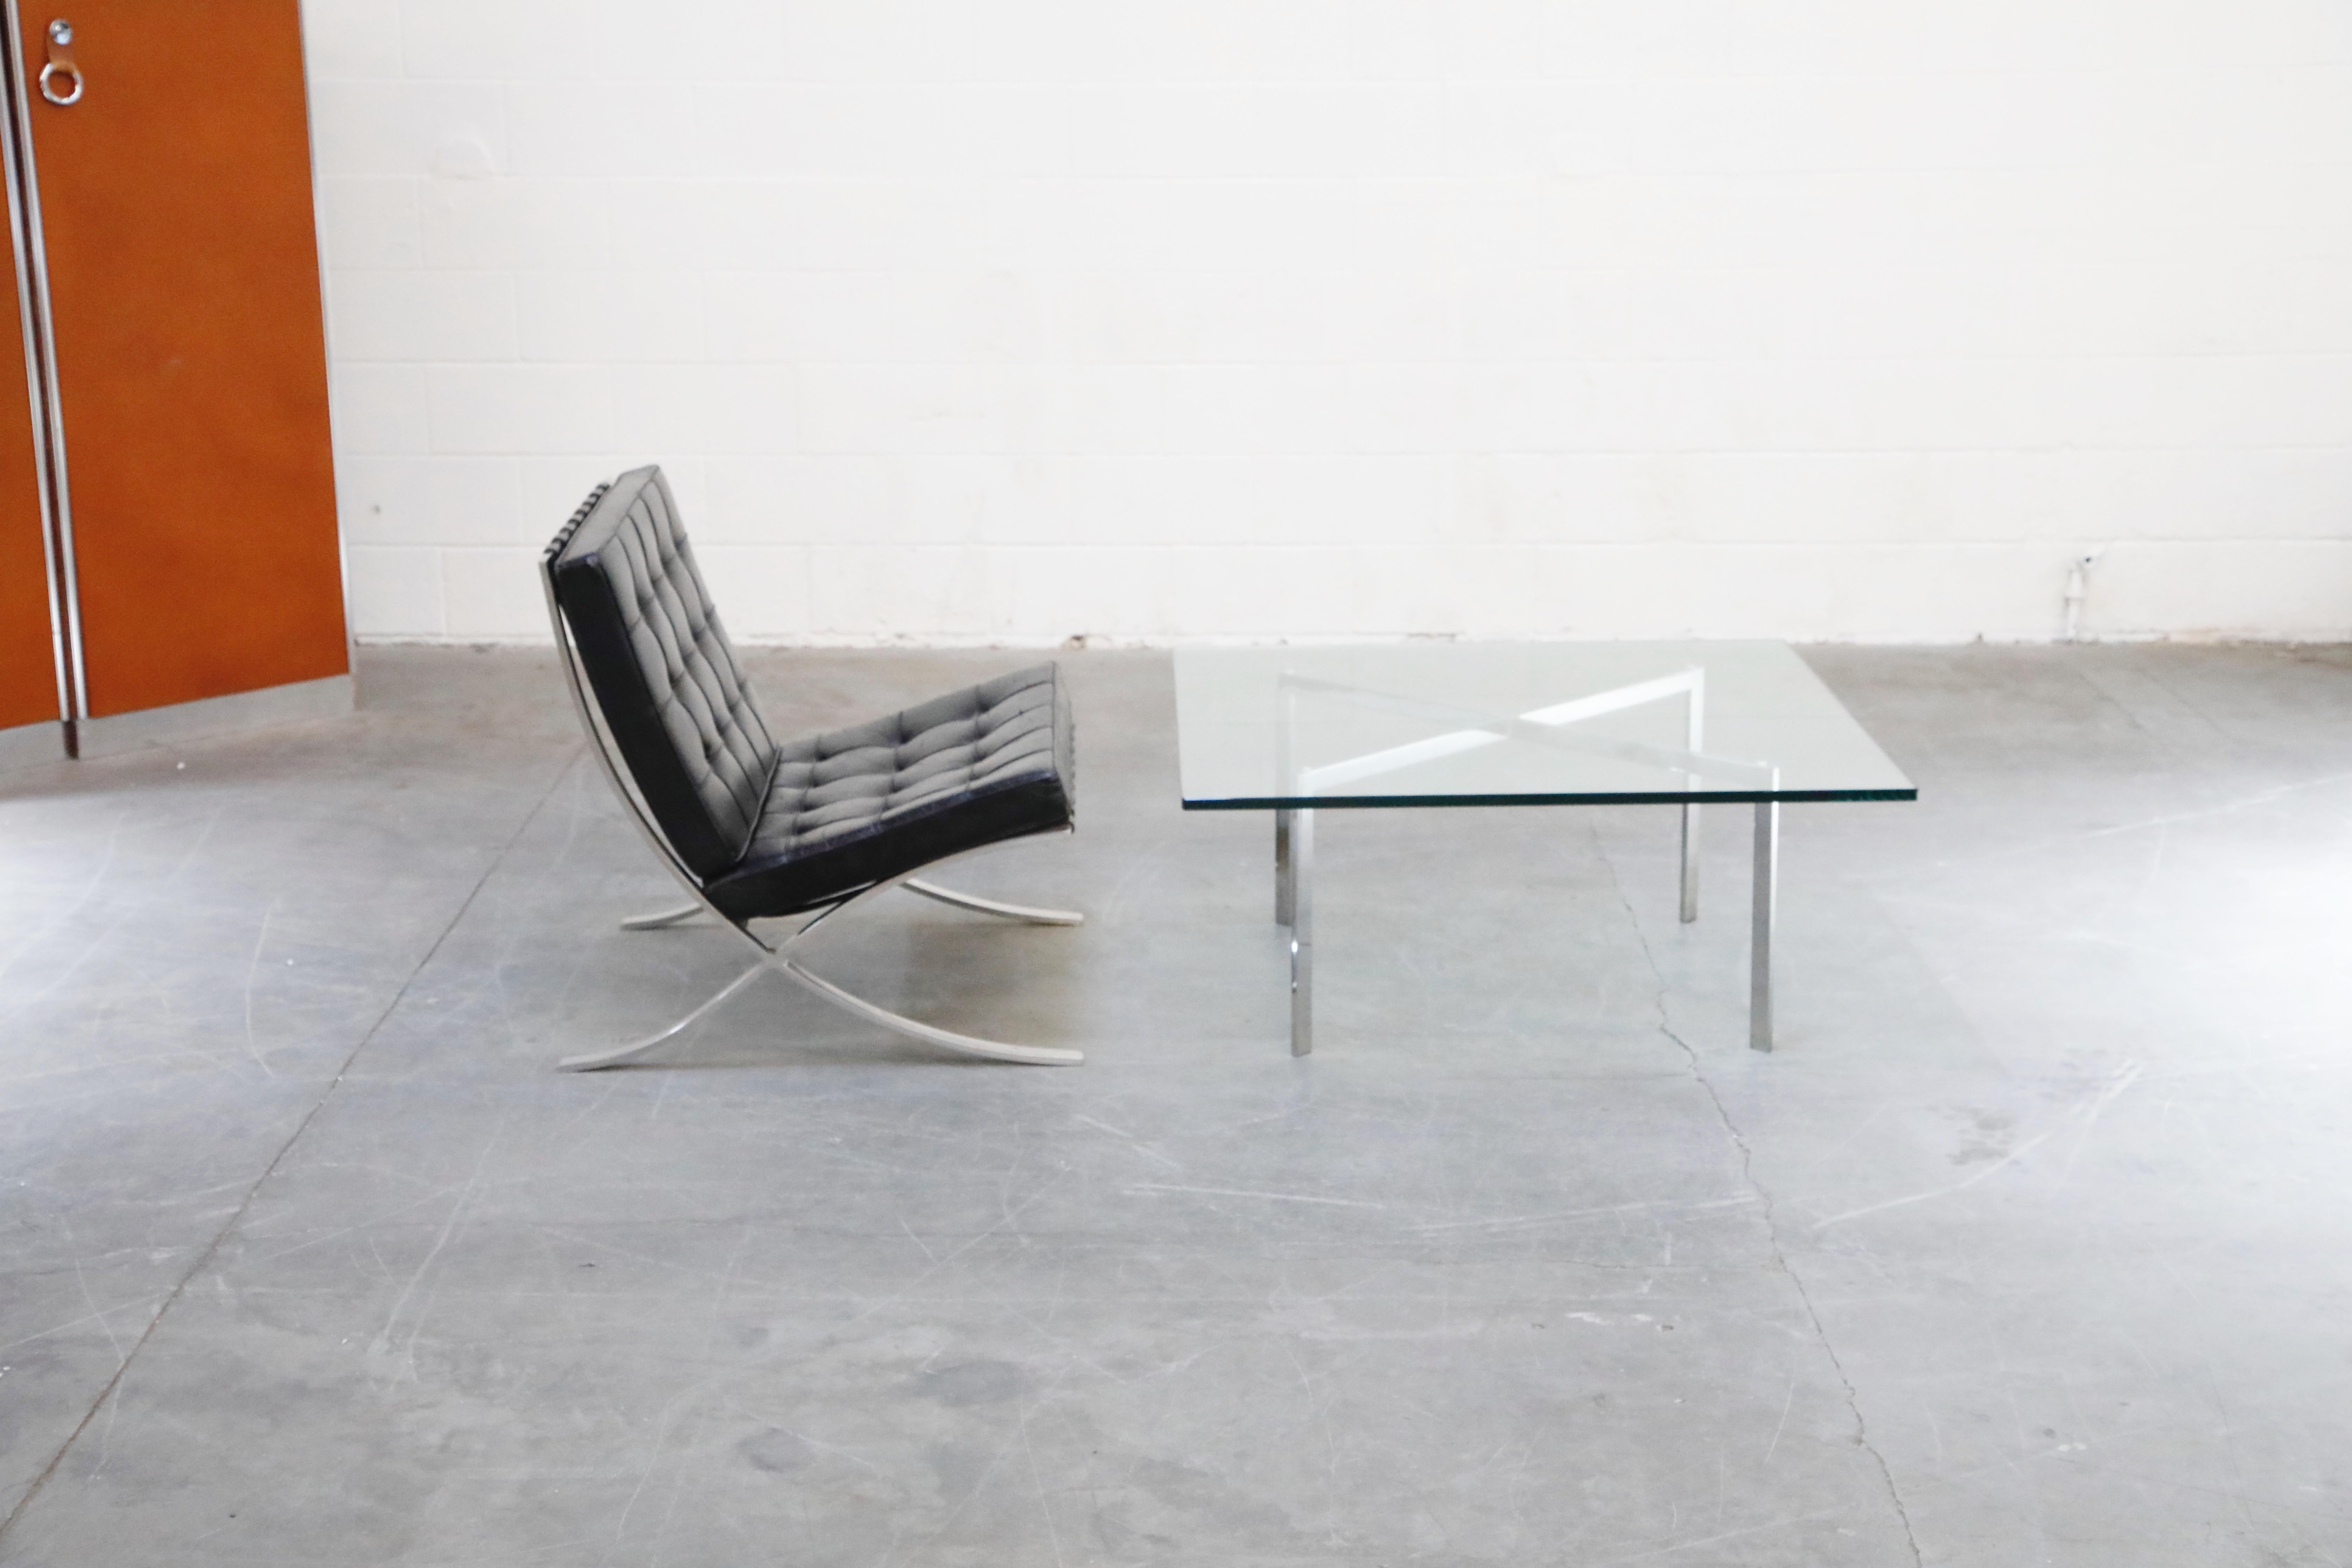 Mid-Century Modern Barcelona Coffee Table by Mies van der Rohe for Knoll International, Signed